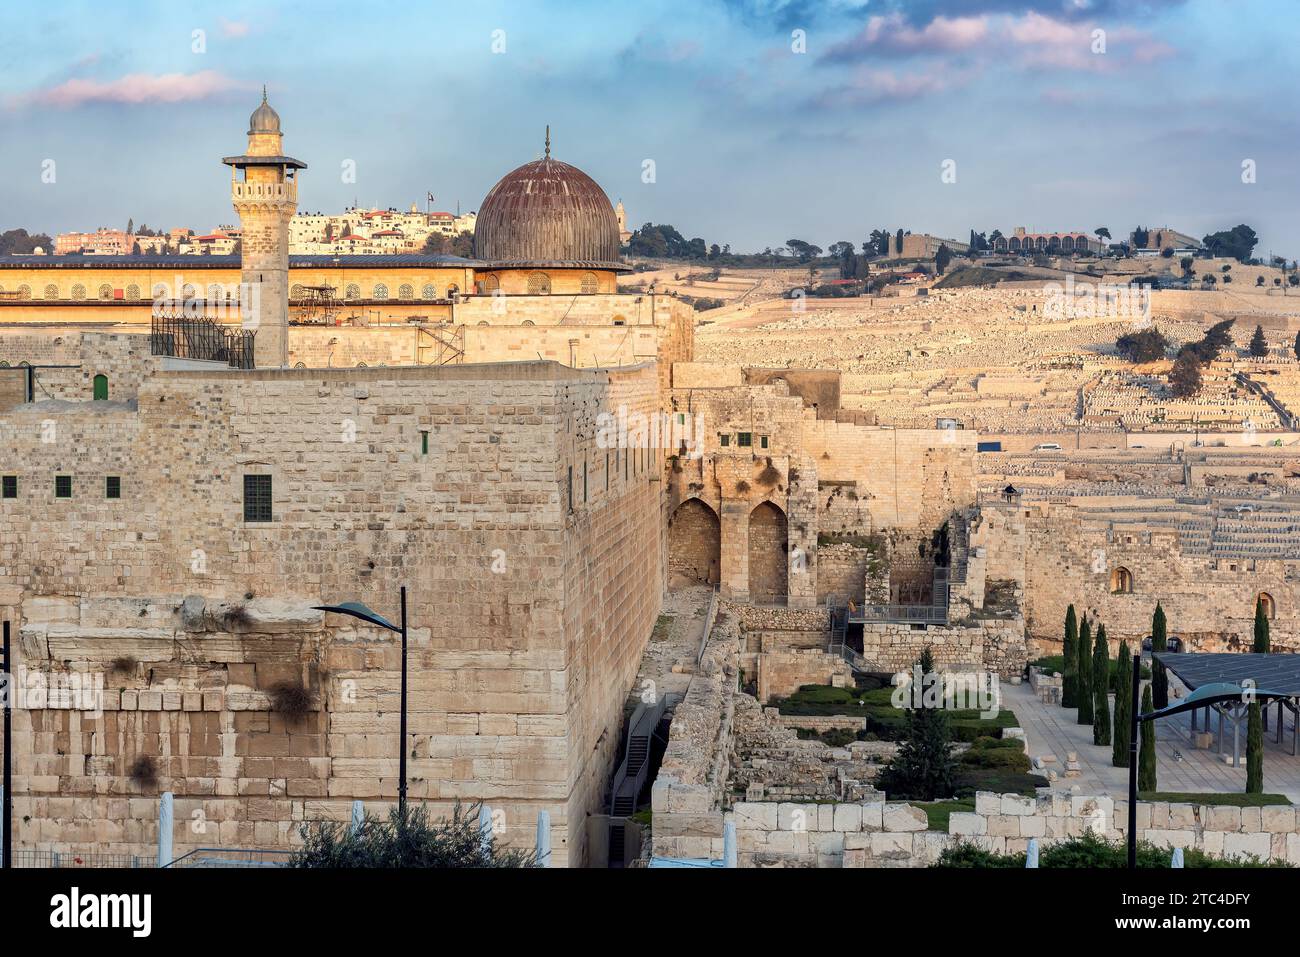 Al-Aqsa Mosque at sunset in Jerusalem Old City, Israel. Stock Photo